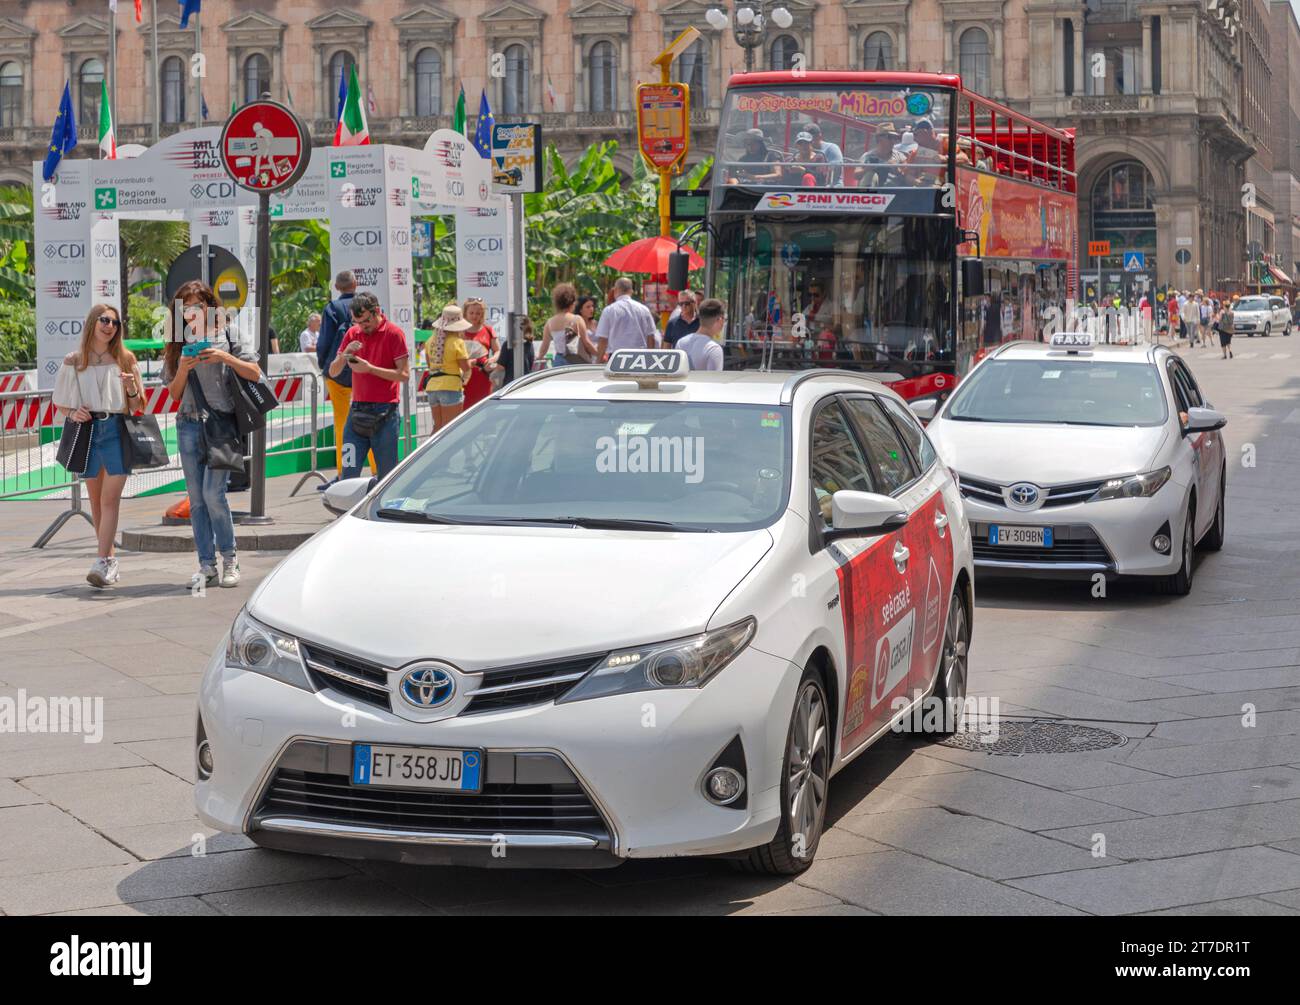 Milan, Italy - June 15, 2019: White Hybrid and Electric Taxi Vehicles at Street in City Centre at Summer Day. Stock Photo